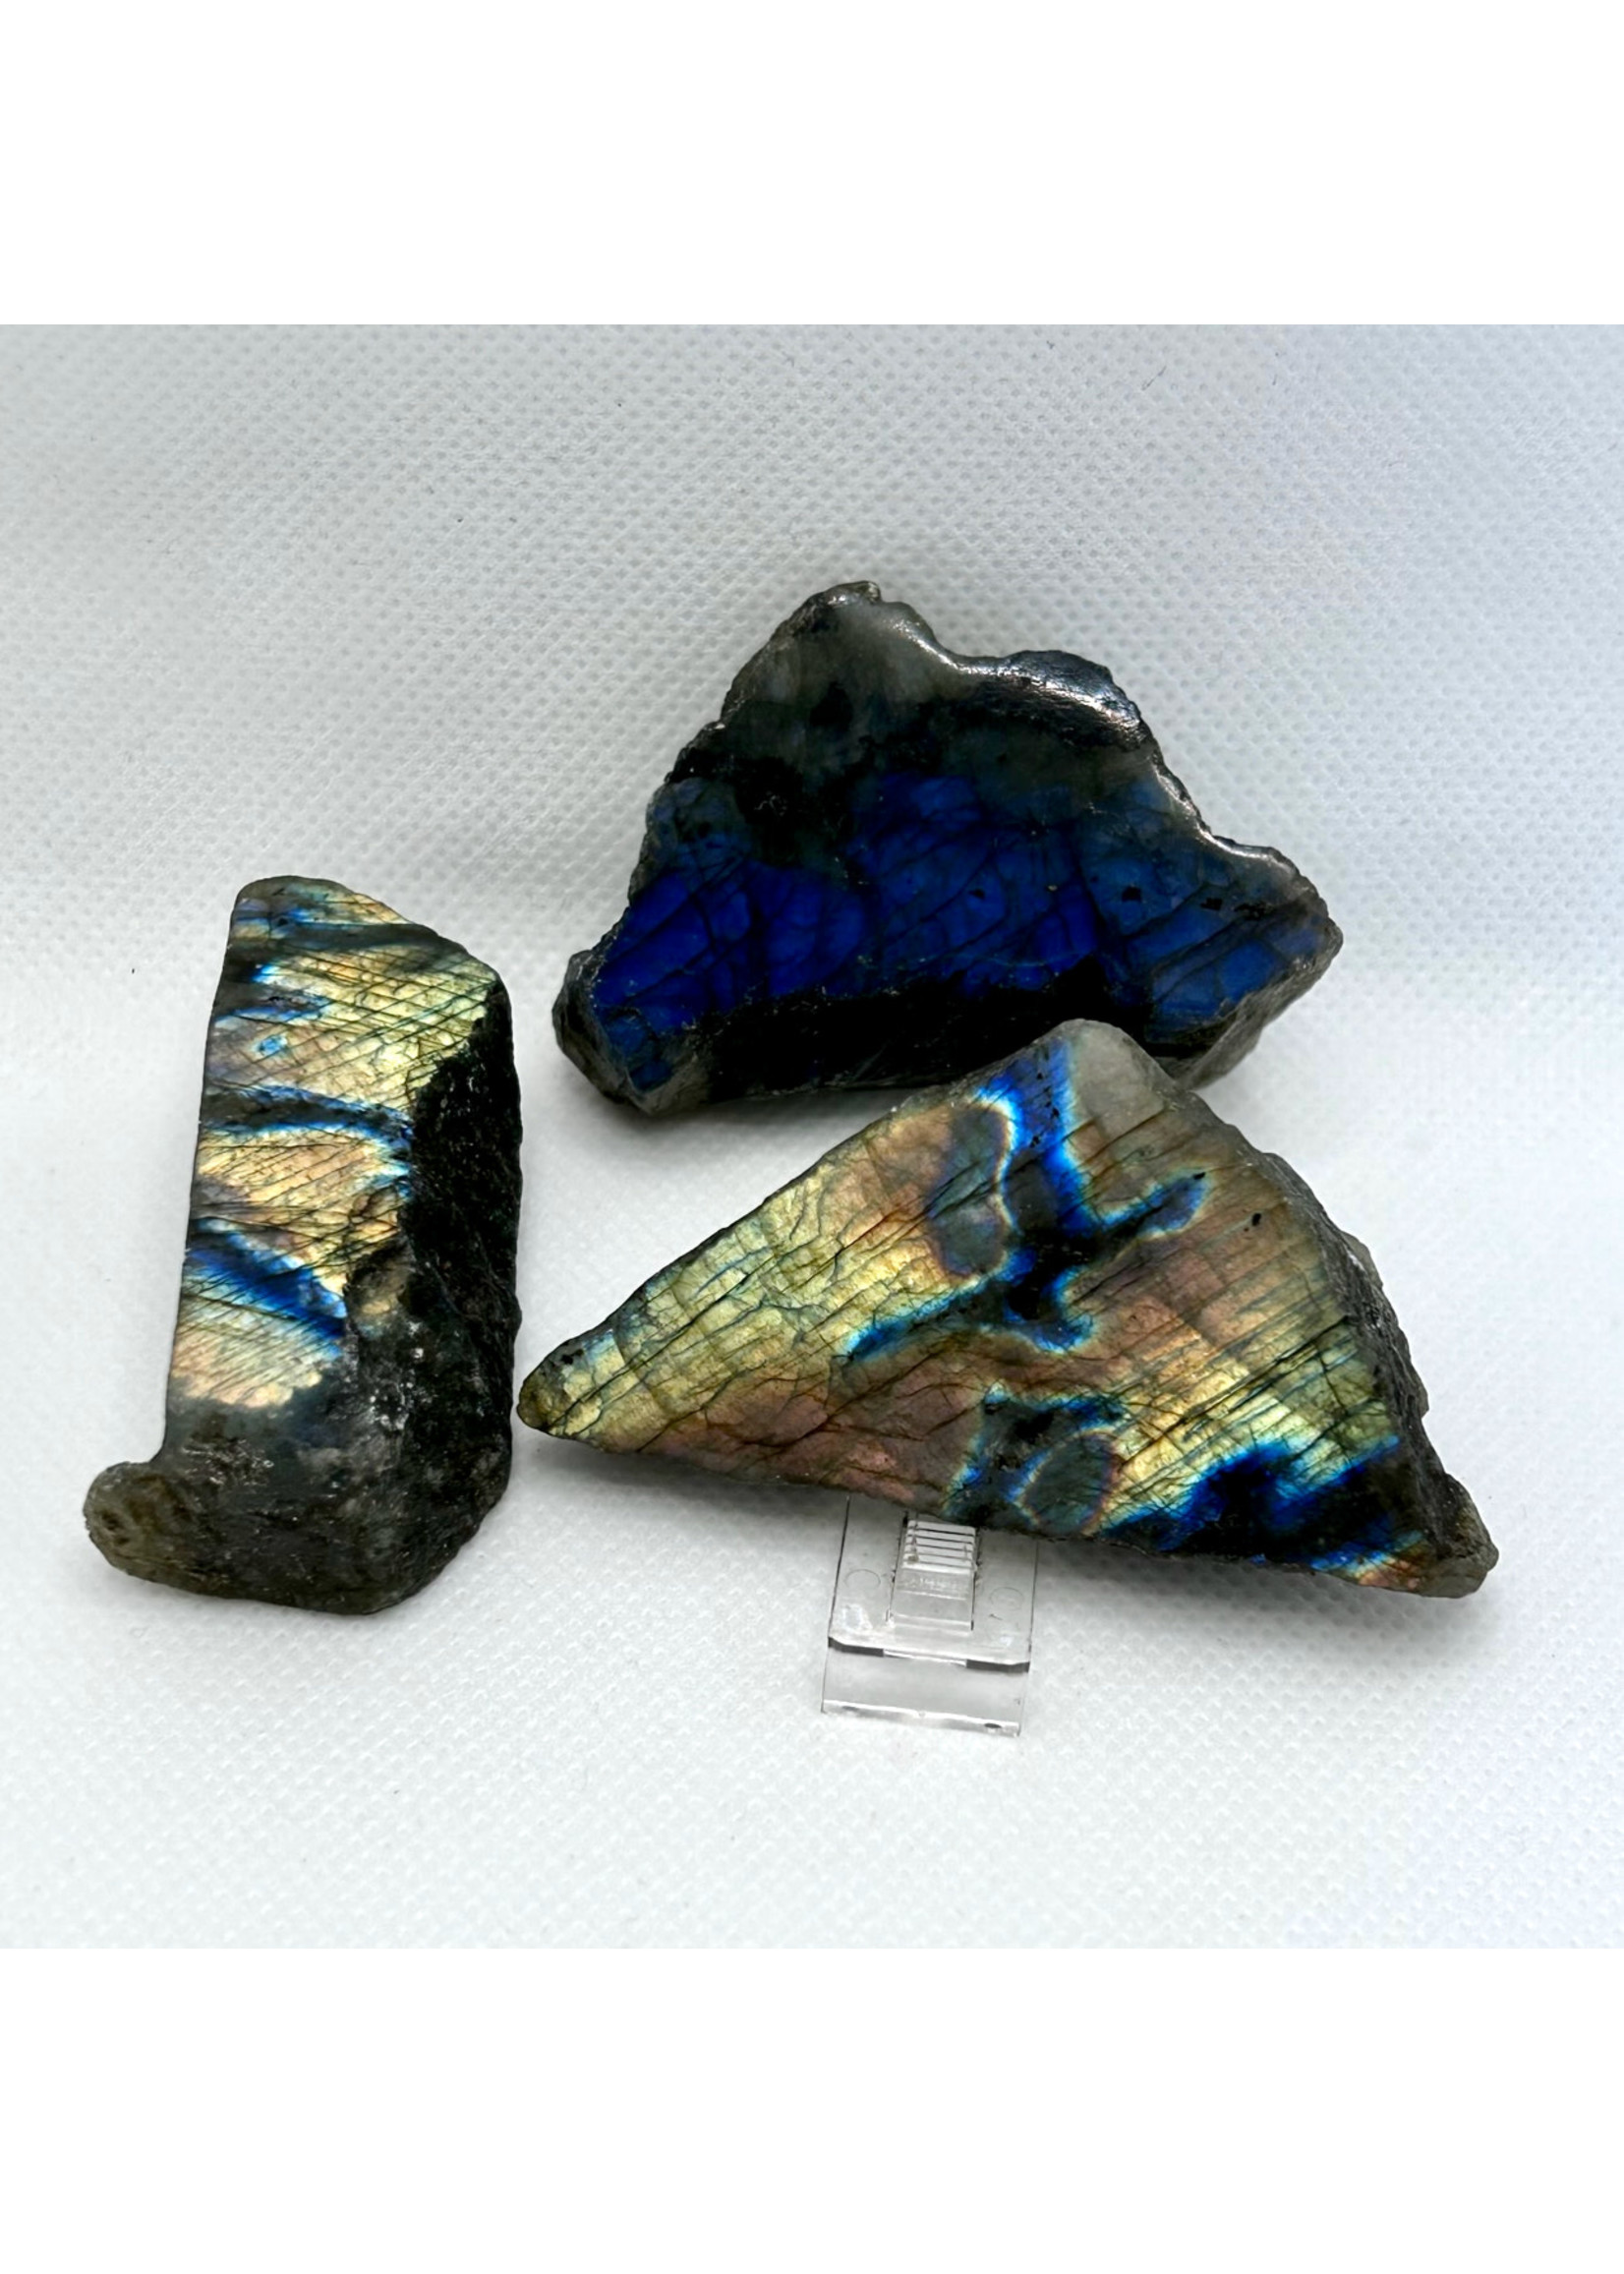 Labradorite Polished One Side for embracing possibilities